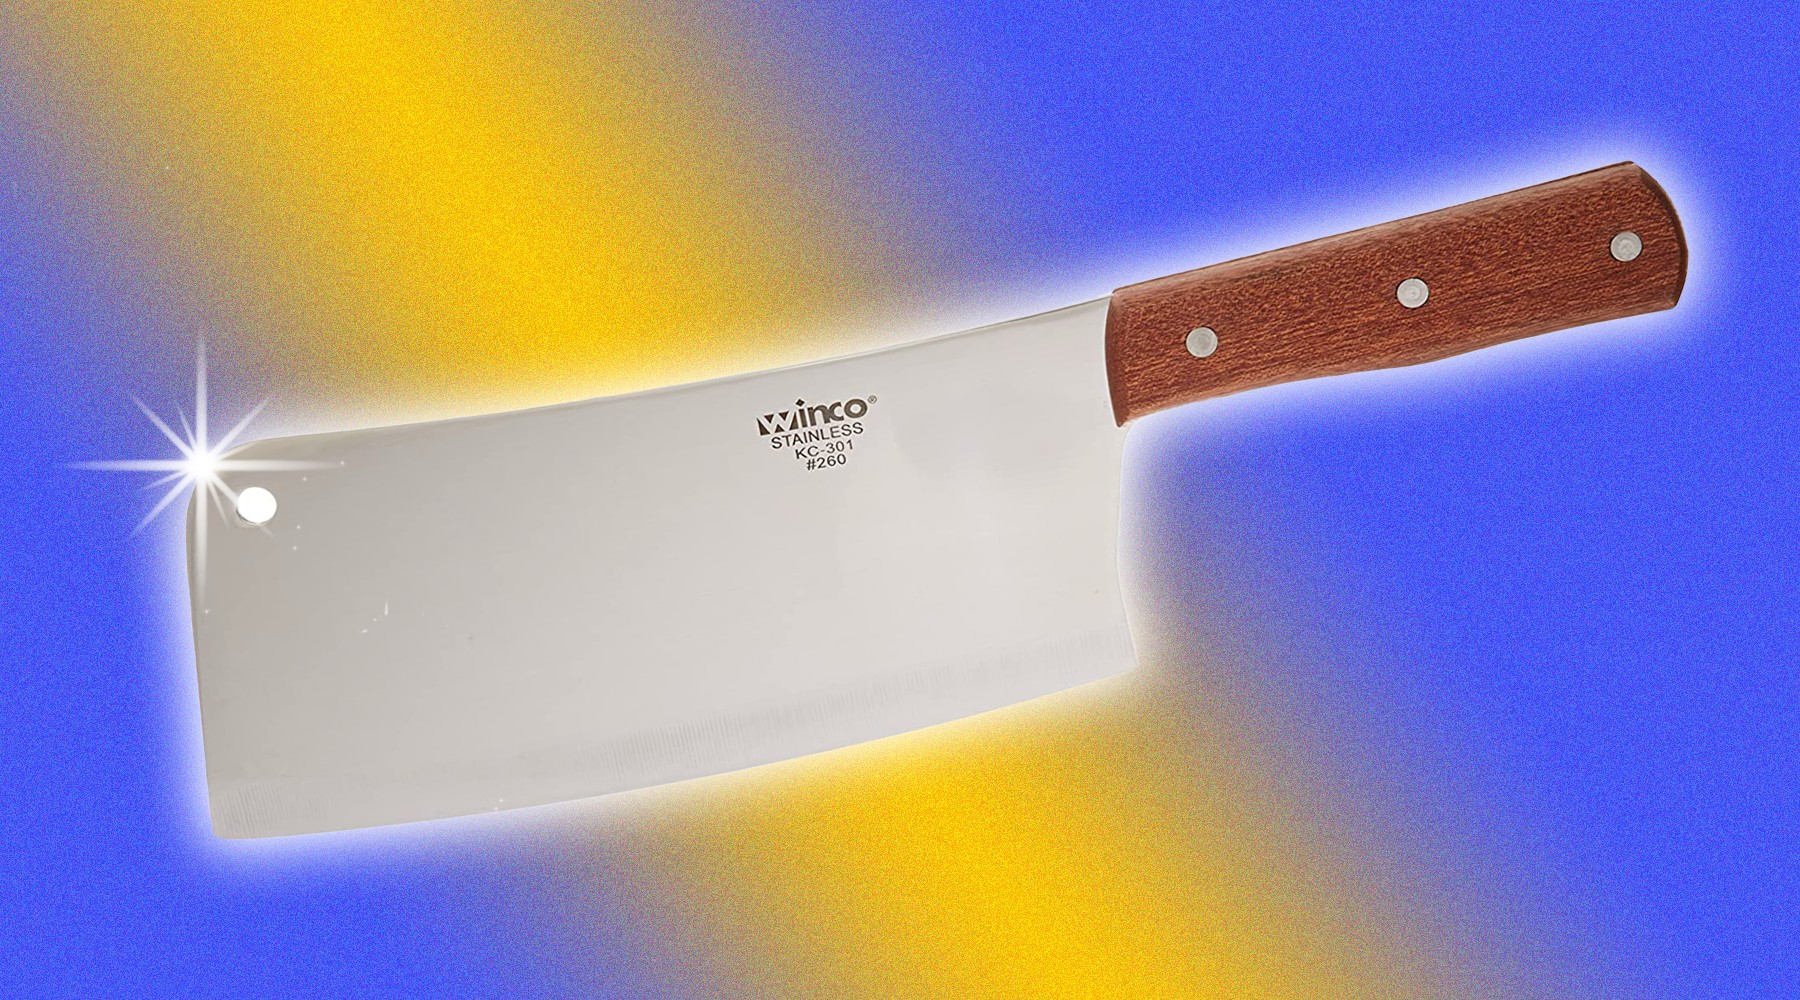 Why I Use a Chinese Cleaver More Than Any Other Knife